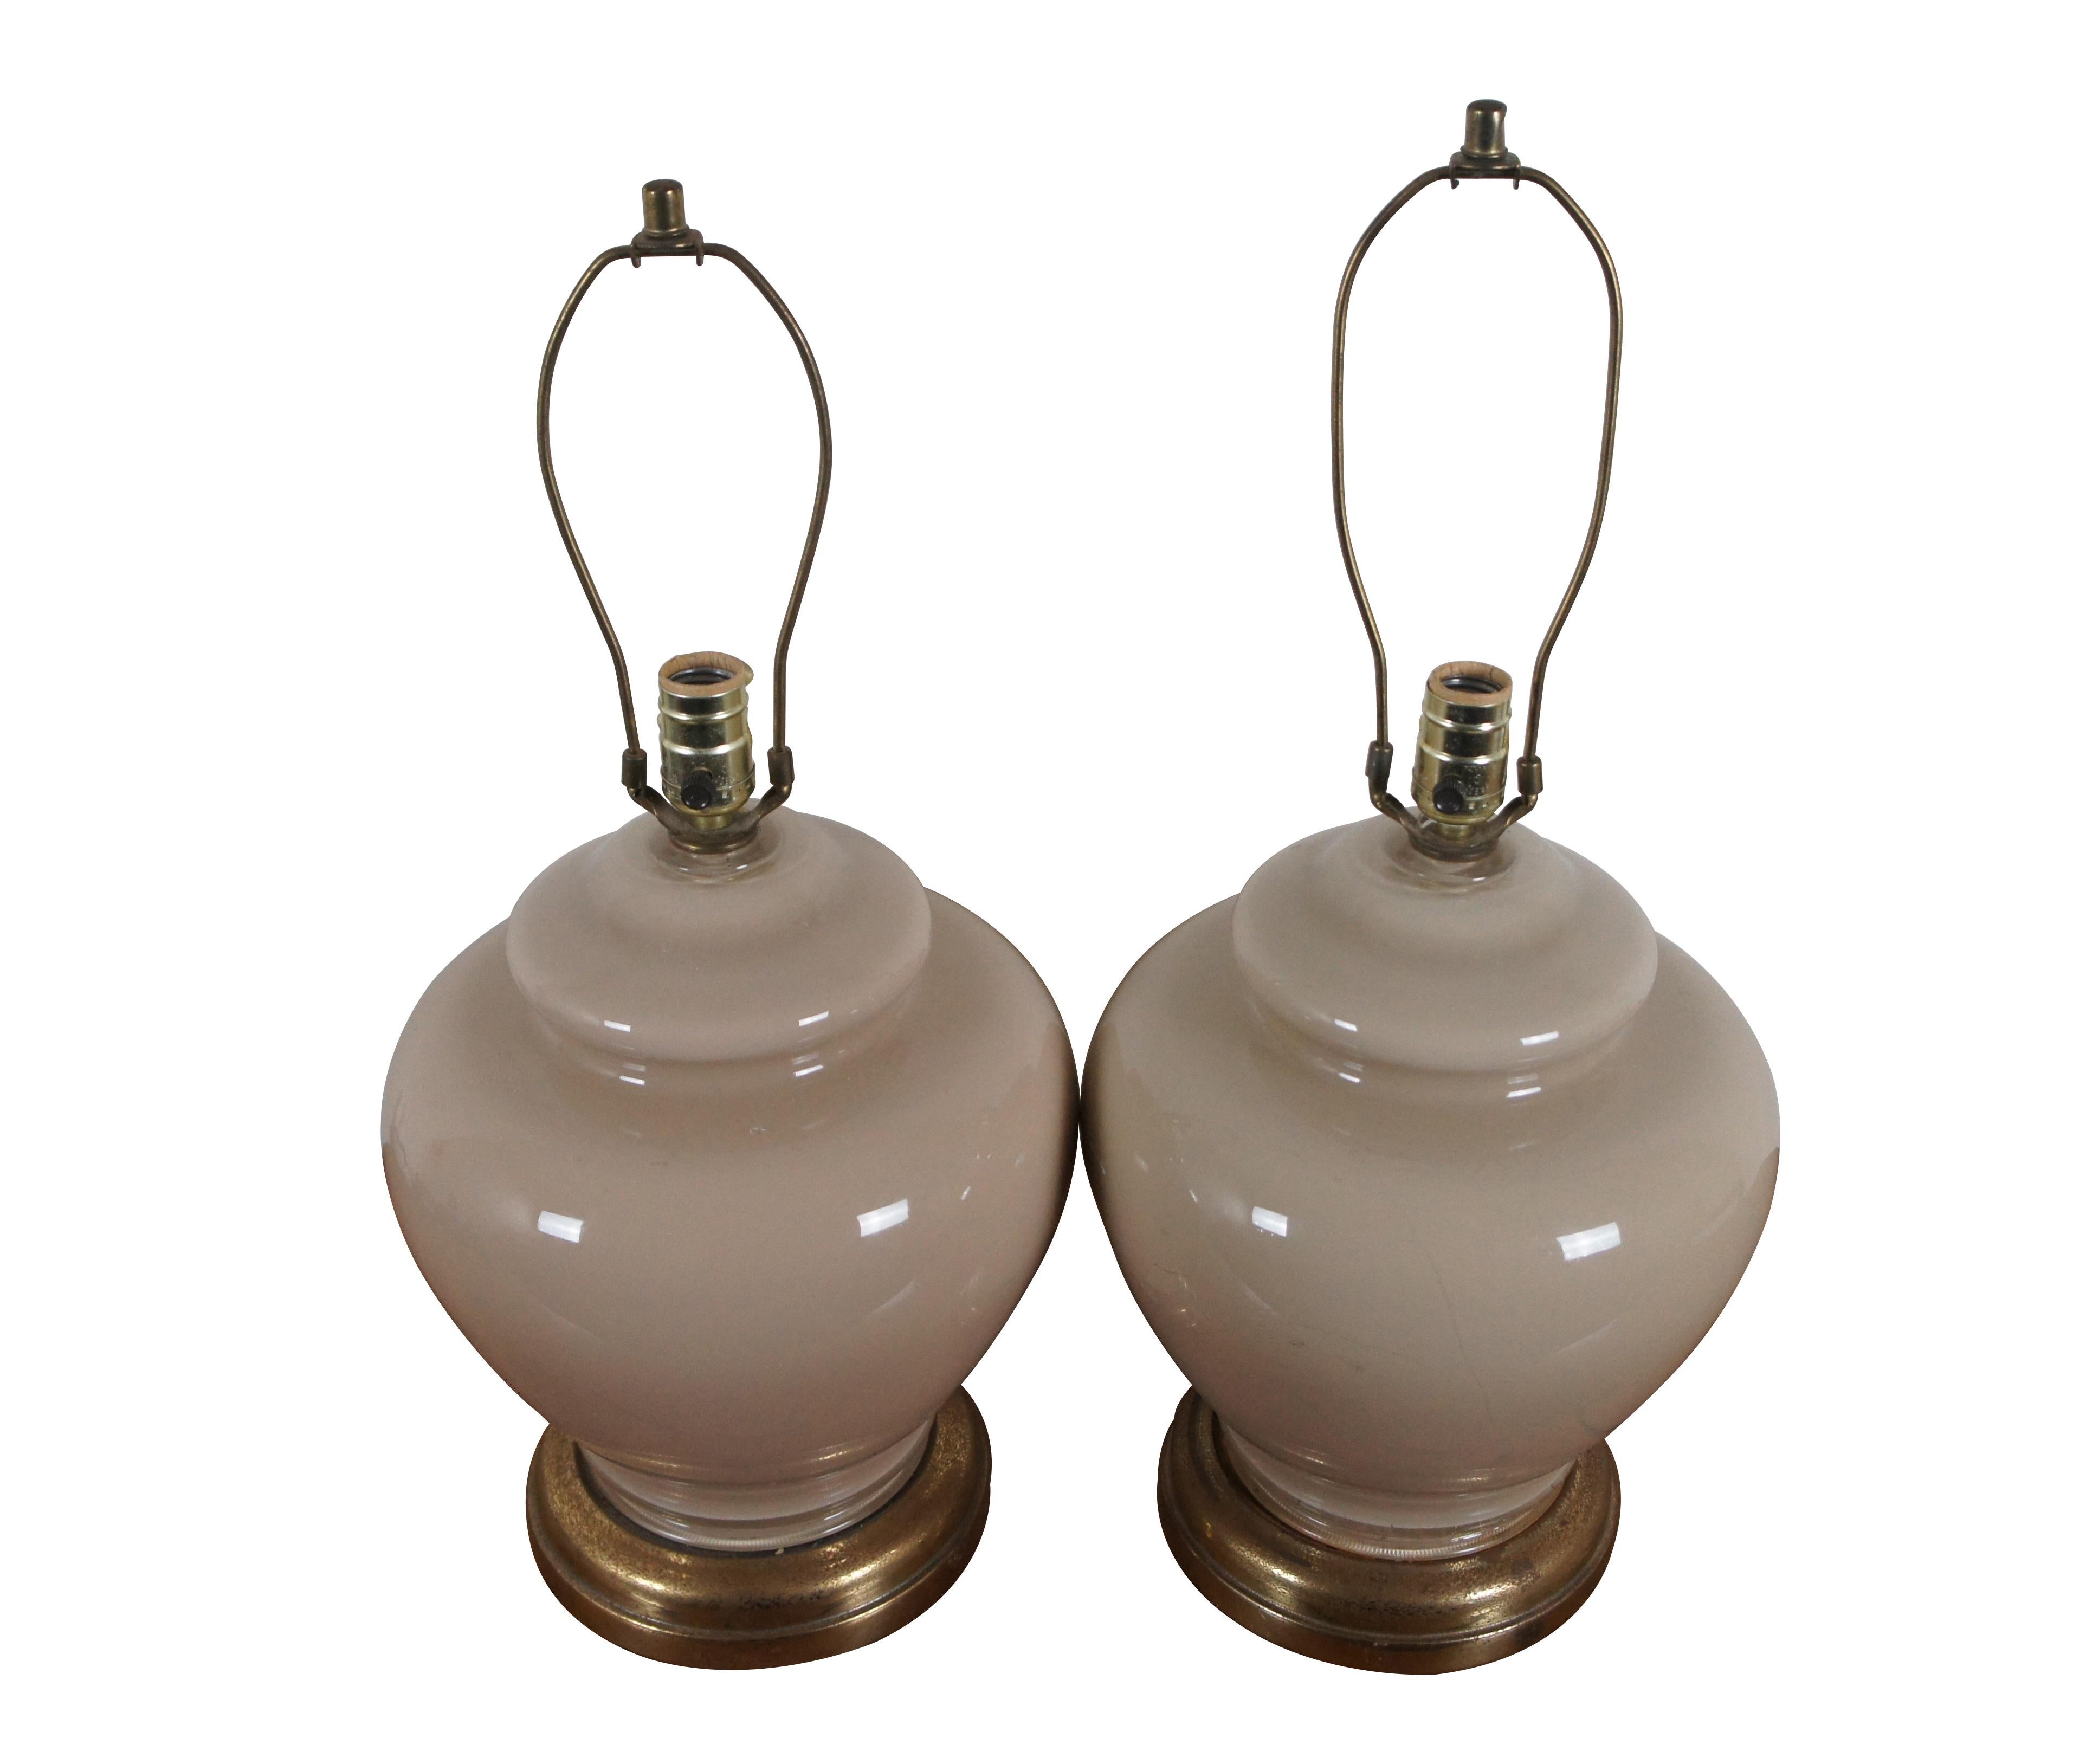 Three mid 20th century glass table lamps featuring a bulbous ginger jar shape, reverse painted a slightly pinkish beige, with brass bases. Includes harps and simple cap shaped finials.

Dimensions:
11.25